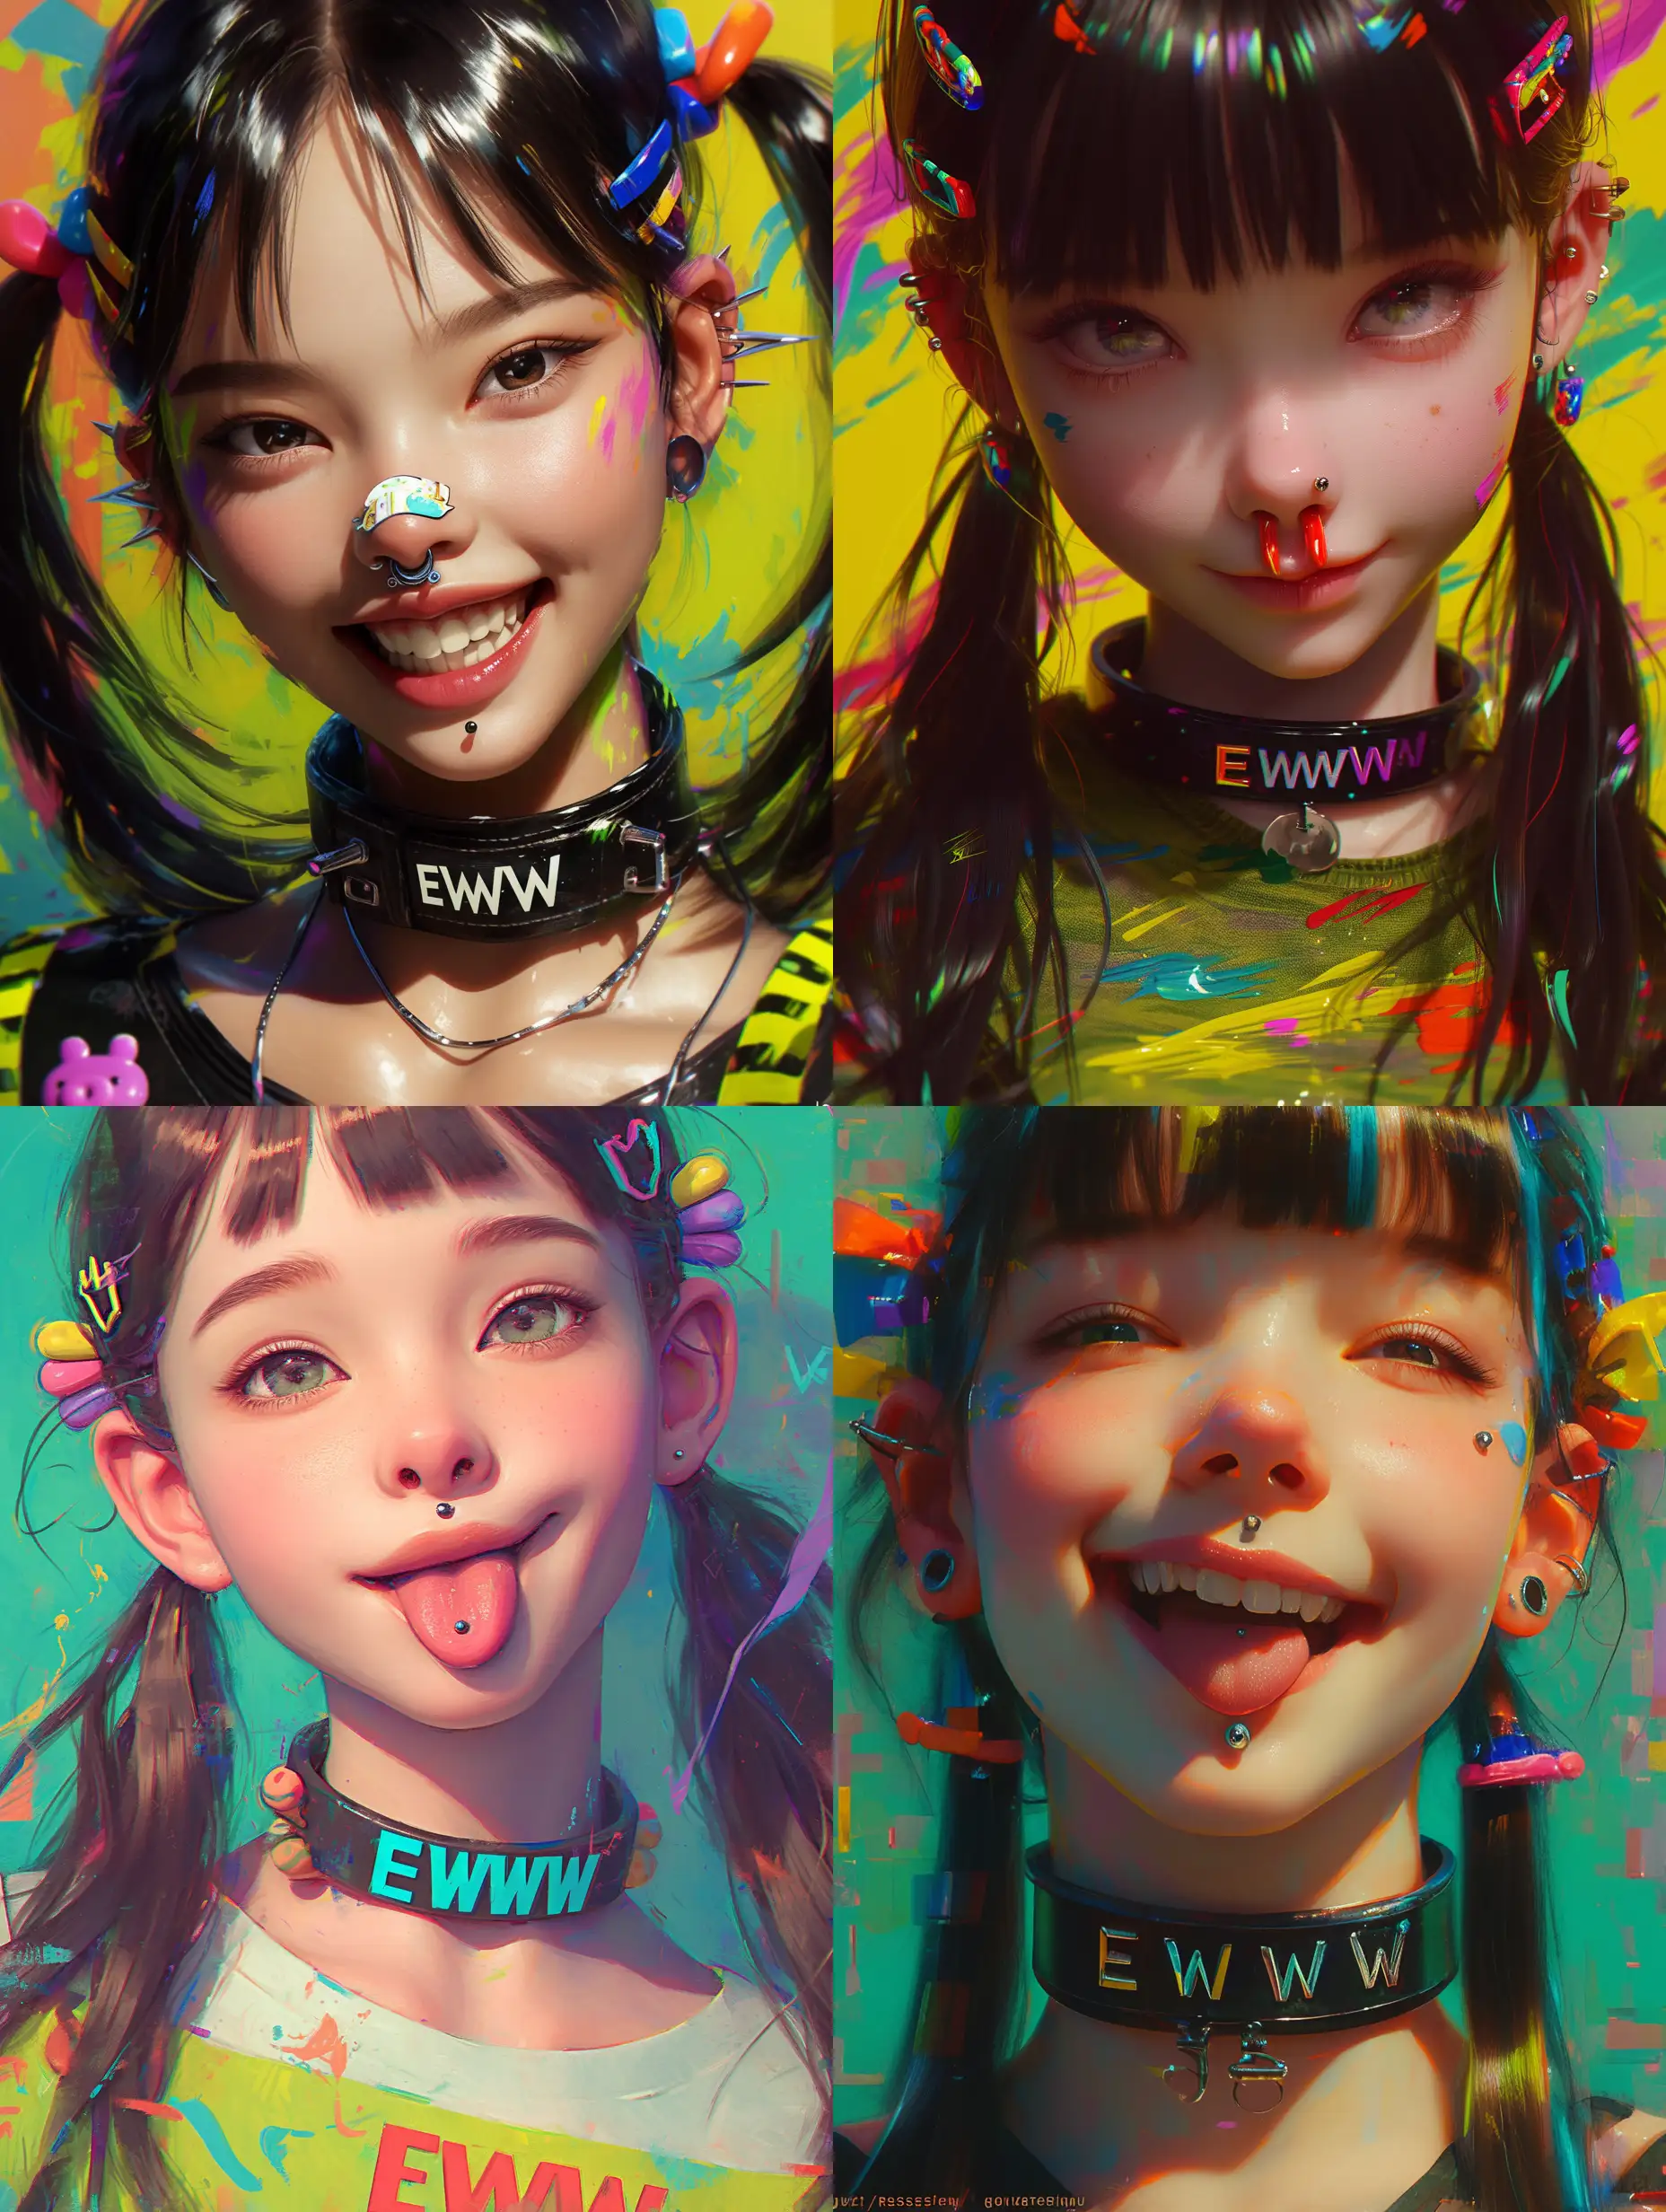 Sweet-Woman-with-EWW-Collar-Detailed-Realistic-Digital-Illustration